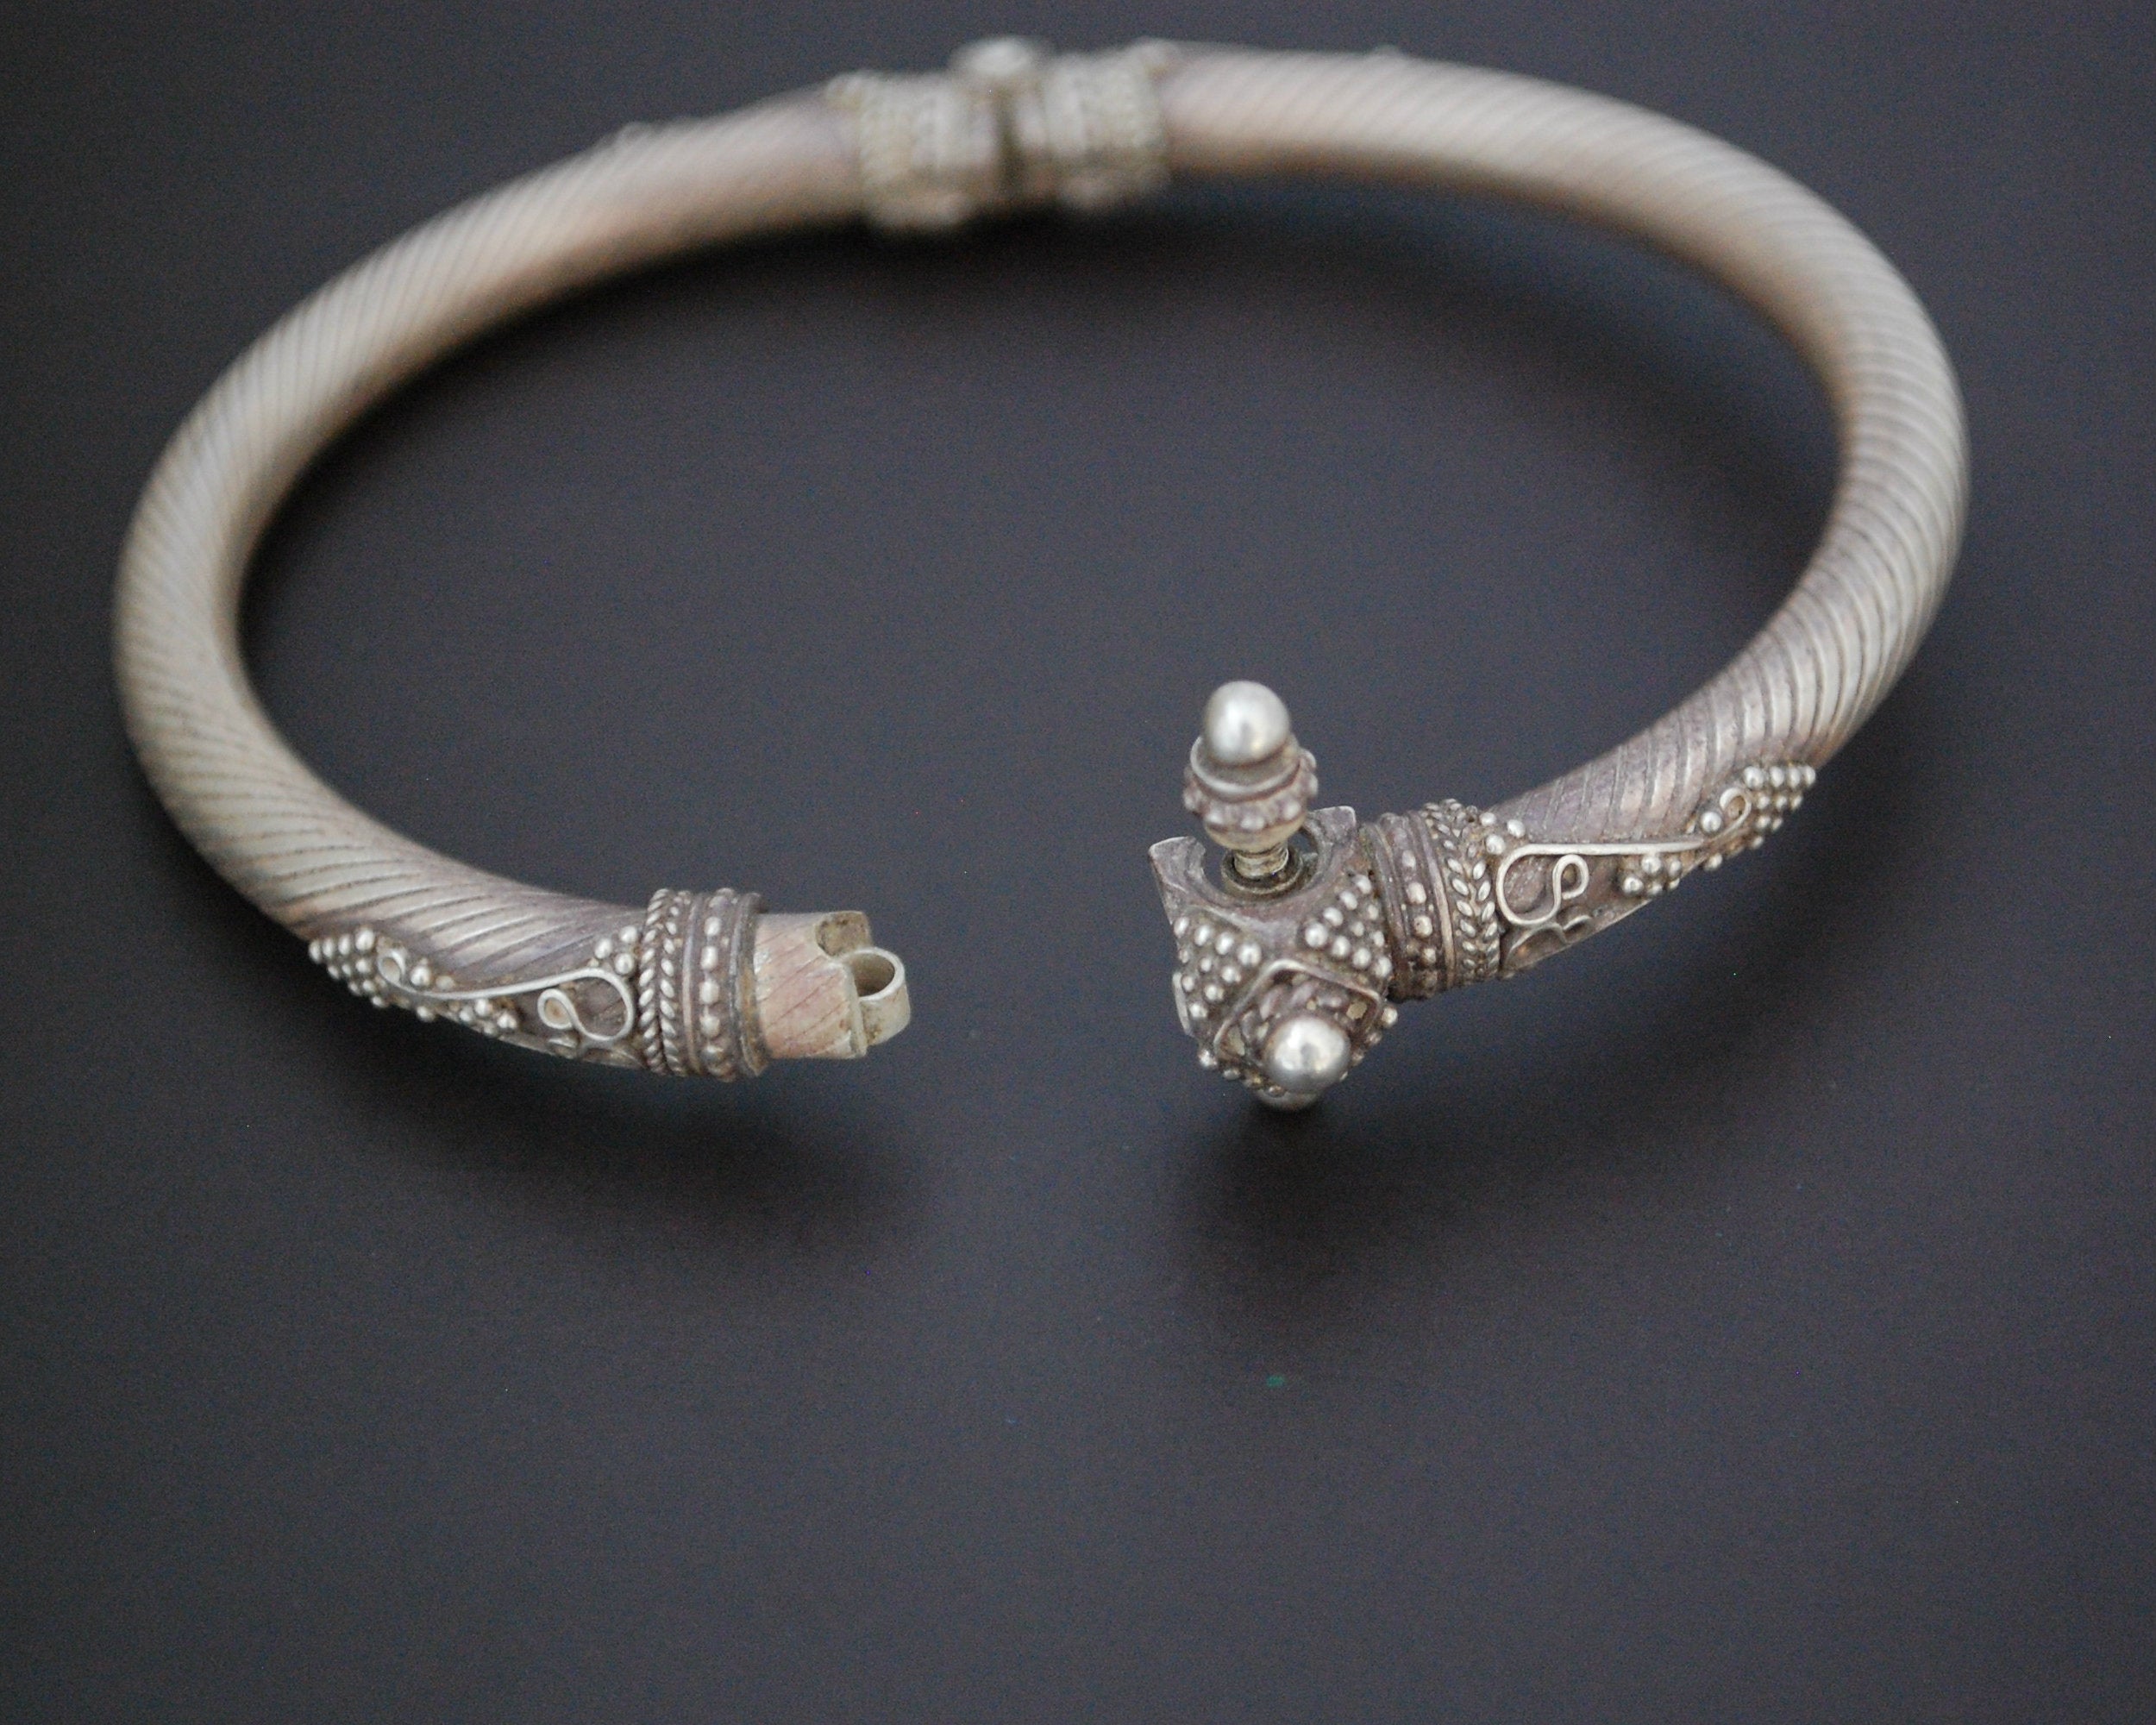 Ethnic Indian Silver Bracelet from India - Hinged